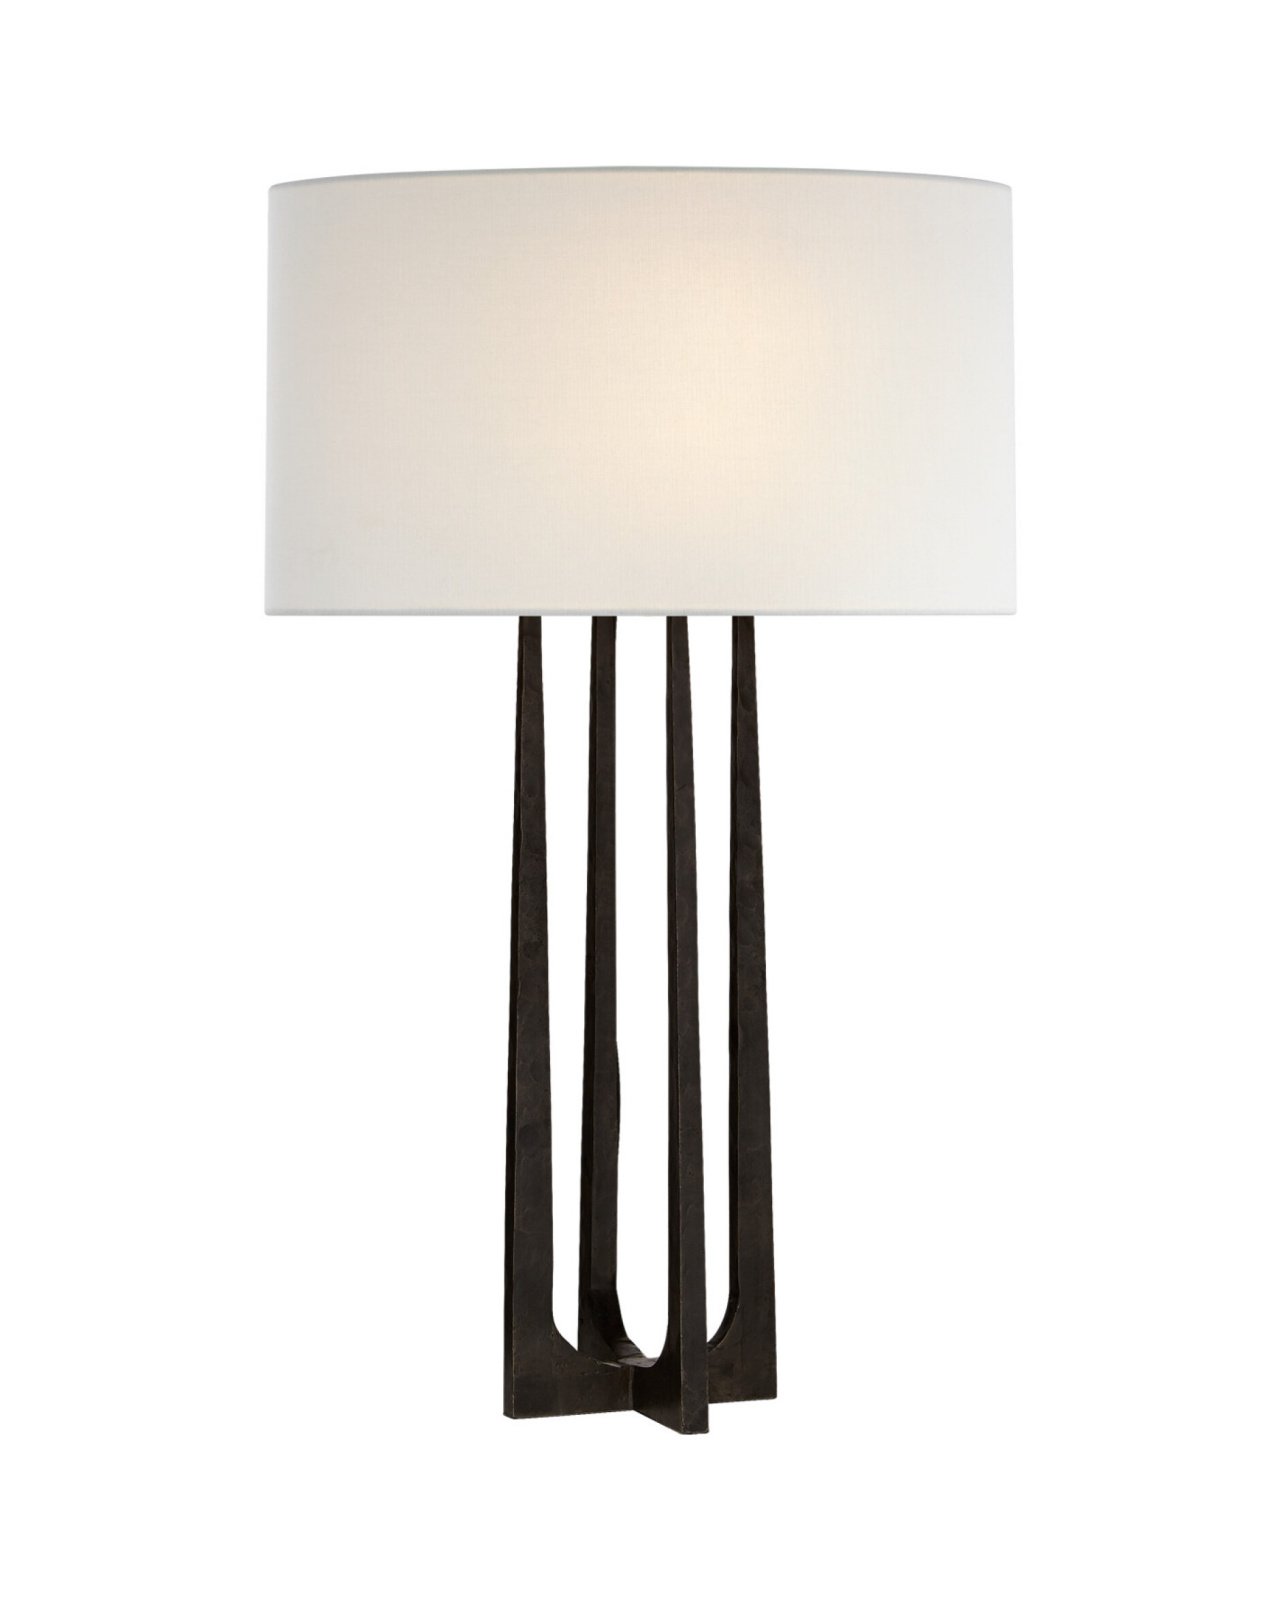 Scala Hand-Forged Table Lamp Black